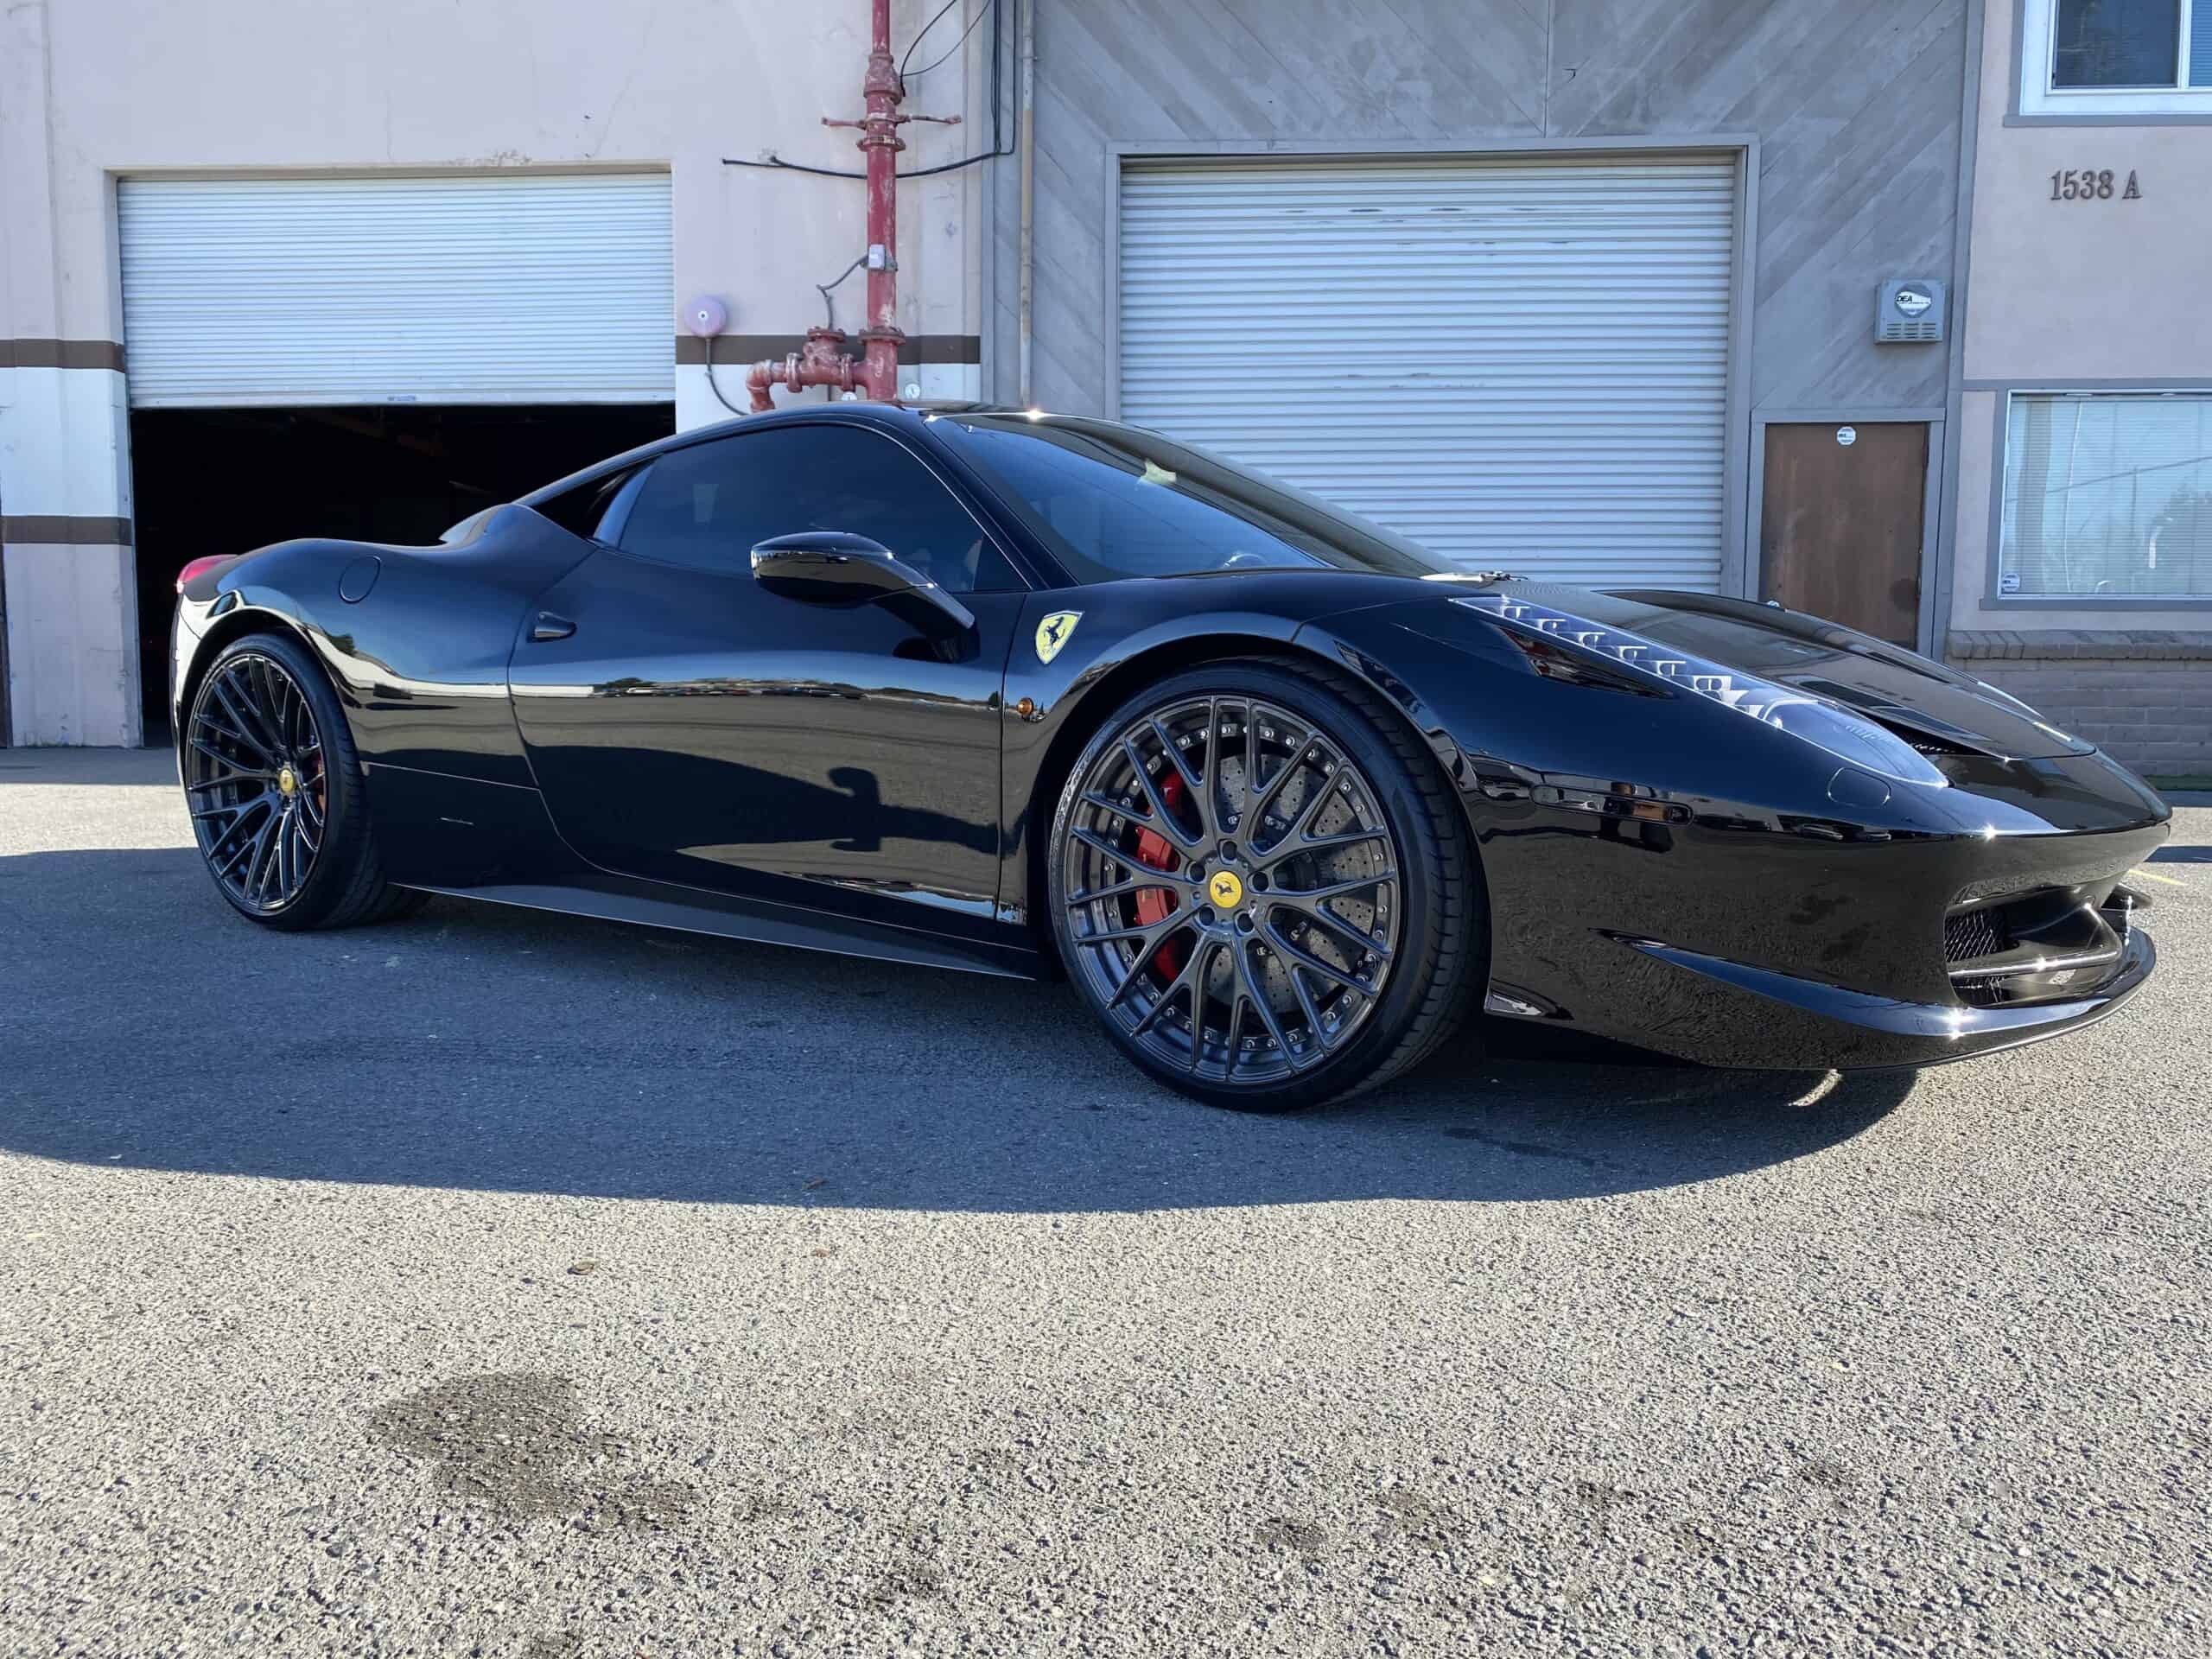 a black sports car parked in front of a garage